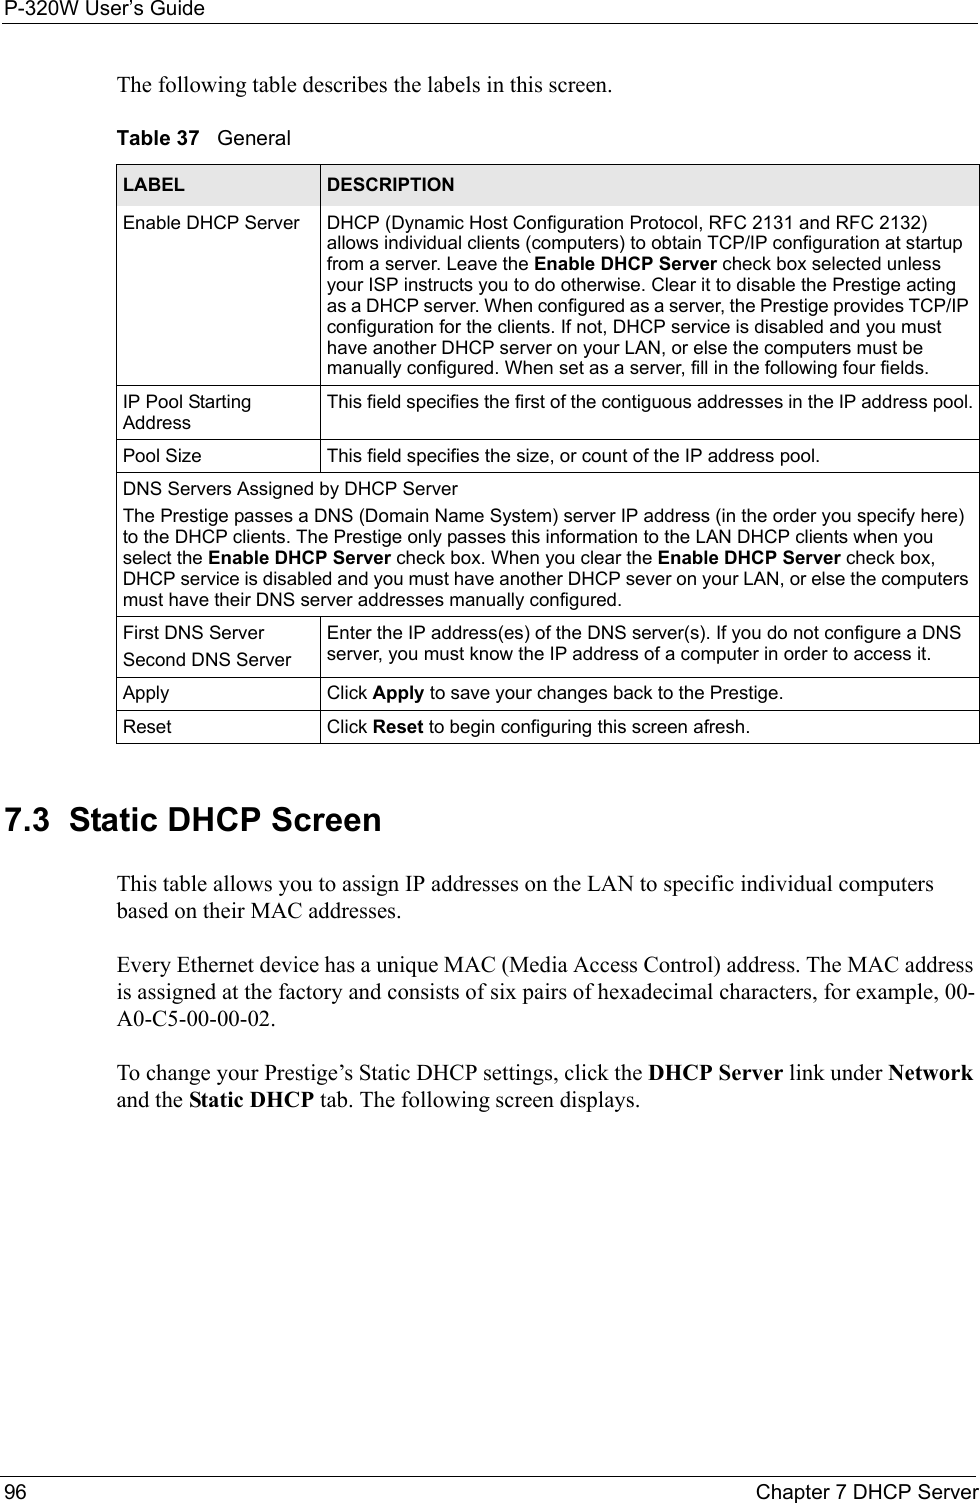 P-320W User’s Guide96  Chapter 7 DHCP ServerThe following table describes the labels in this screen.Table 37   GeneralLABEL DESCRIPTIONEnable DHCP Server DHCP (Dynamic Host Configuration Protocol, RFC 2131 and RFC 2132) allows individual clients (computers) to obtain TCP/IP configuration at startup from a server. Leave the Enable DHCP Server check box selected unless your ISP instructs you to do otherwise. Clear it to disable the Prestige acting as a DHCP server. When configured as a server, the Prestige provides TCP/IP configuration for the clients. If not, DHCP service is disabled and you must have another DHCP server on your LAN, or else the computers must be manually configured. When set as a server, fill in the following four fields.IP Pool Starting AddressThis field specifies the first of the contiguous addresses in the IP address pool.Pool Size This field specifies the size, or count of the IP address pool.DNS Servers Assigned by DHCP Server The Prestige passes a DNS (Domain Name System) server IP address (in the order you specify here) to the DHCP clients. The Prestige only passes this information to the LAN DHCP clients when you select the Enable DHCP Server check box. When you clear the Enable DHCP Server check box, DHCP service is disabled and you must have another DHCP sever on your LAN, or else the computers must have their DNS server addresses manually configured.First DNS ServerSecond DNS ServerEnter the IP address(es) of the DNS server(s). If you do not configure a DNS server, you must know the IP address of a computer in order to access it.Apply Click Apply to save your changes back to the Prestige.Reset Click Reset to begin configuring this screen afresh.7.3  Static DHCP ScreenThis table allows you to assign IP addresses on the LAN to specific individual computers based on their MAC addresses. Every Ethernet device has a unique MAC (Media Access Control) address. The MAC address is assigned at the factory and consists of six pairs of hexadecimal characters, for example, 00-A0-C5-00-00-02.To change your Prestige’s Static DHCP settings, click the DHCP Server link under Network and the Static DHCP tab. The following screen displays.